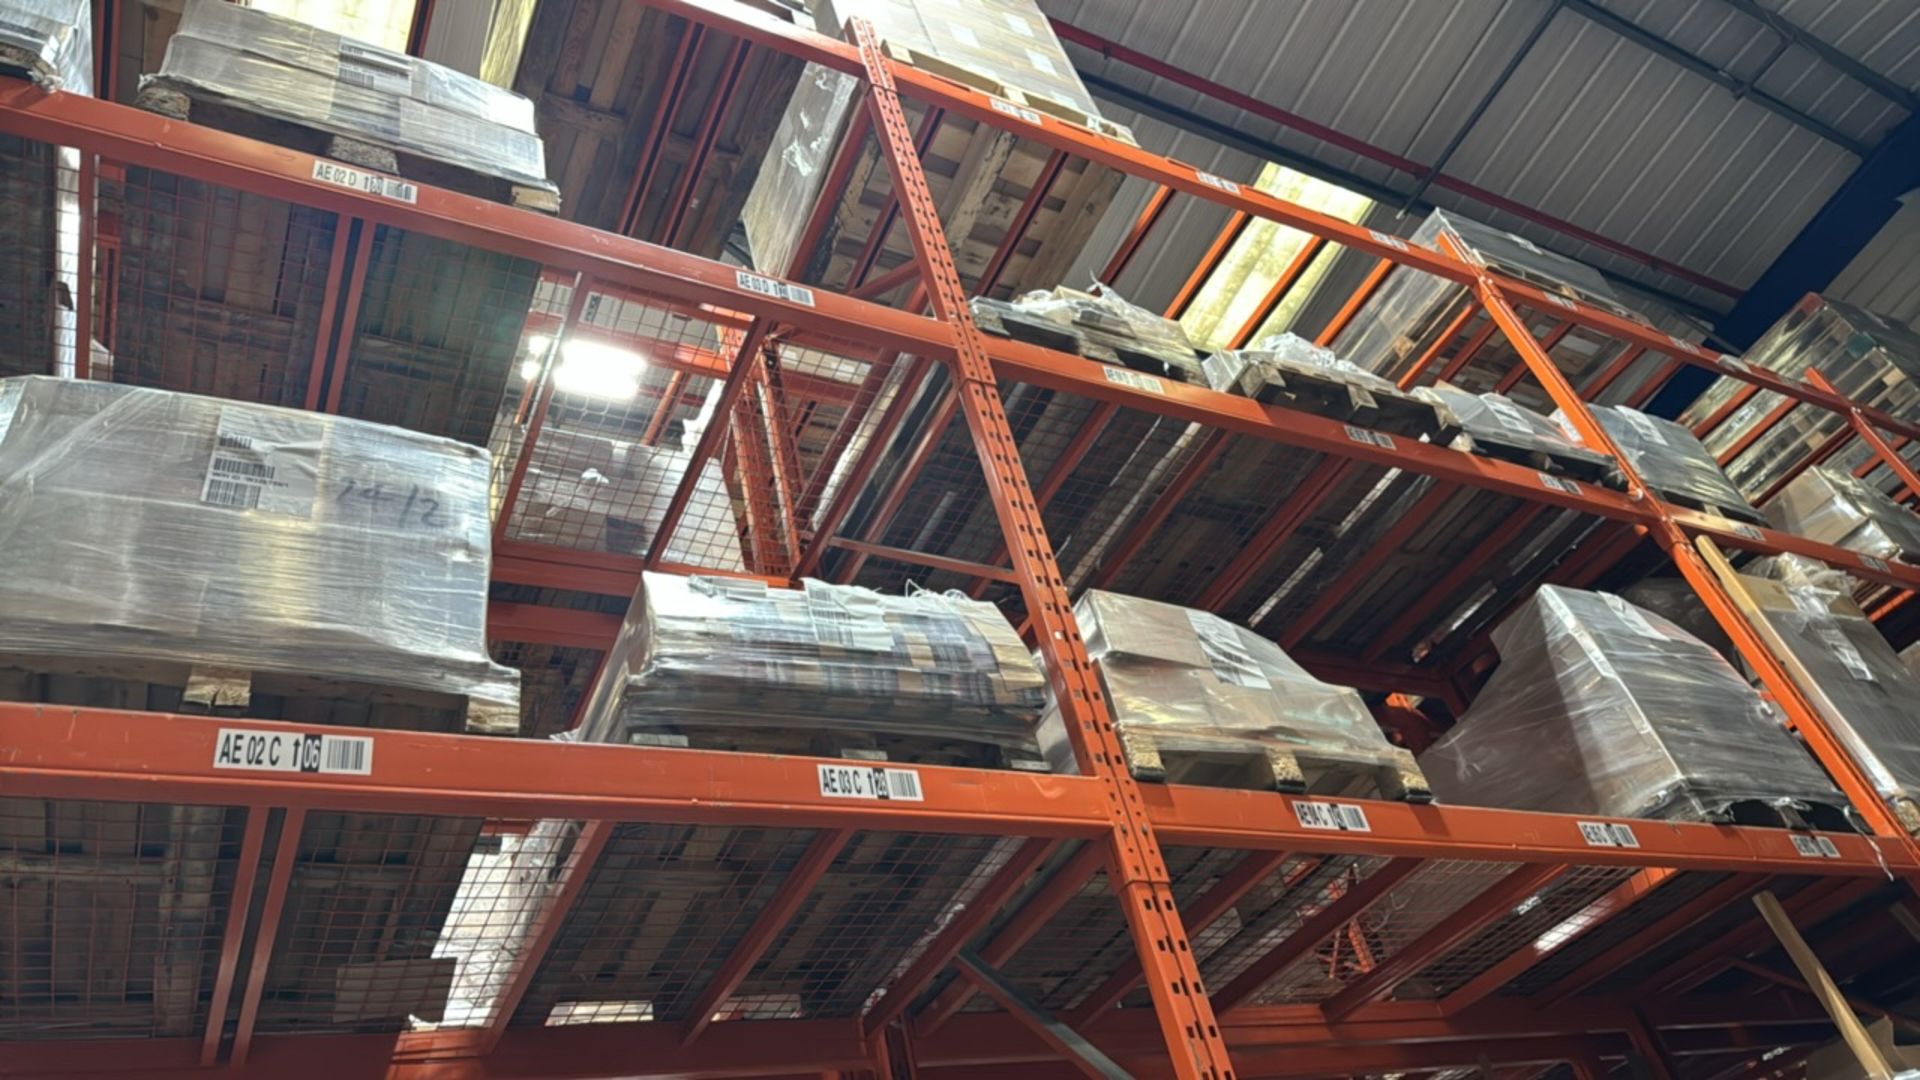 ref 5 - 23 Bays Of Boltless Pallet Racking - Image 5 of 9